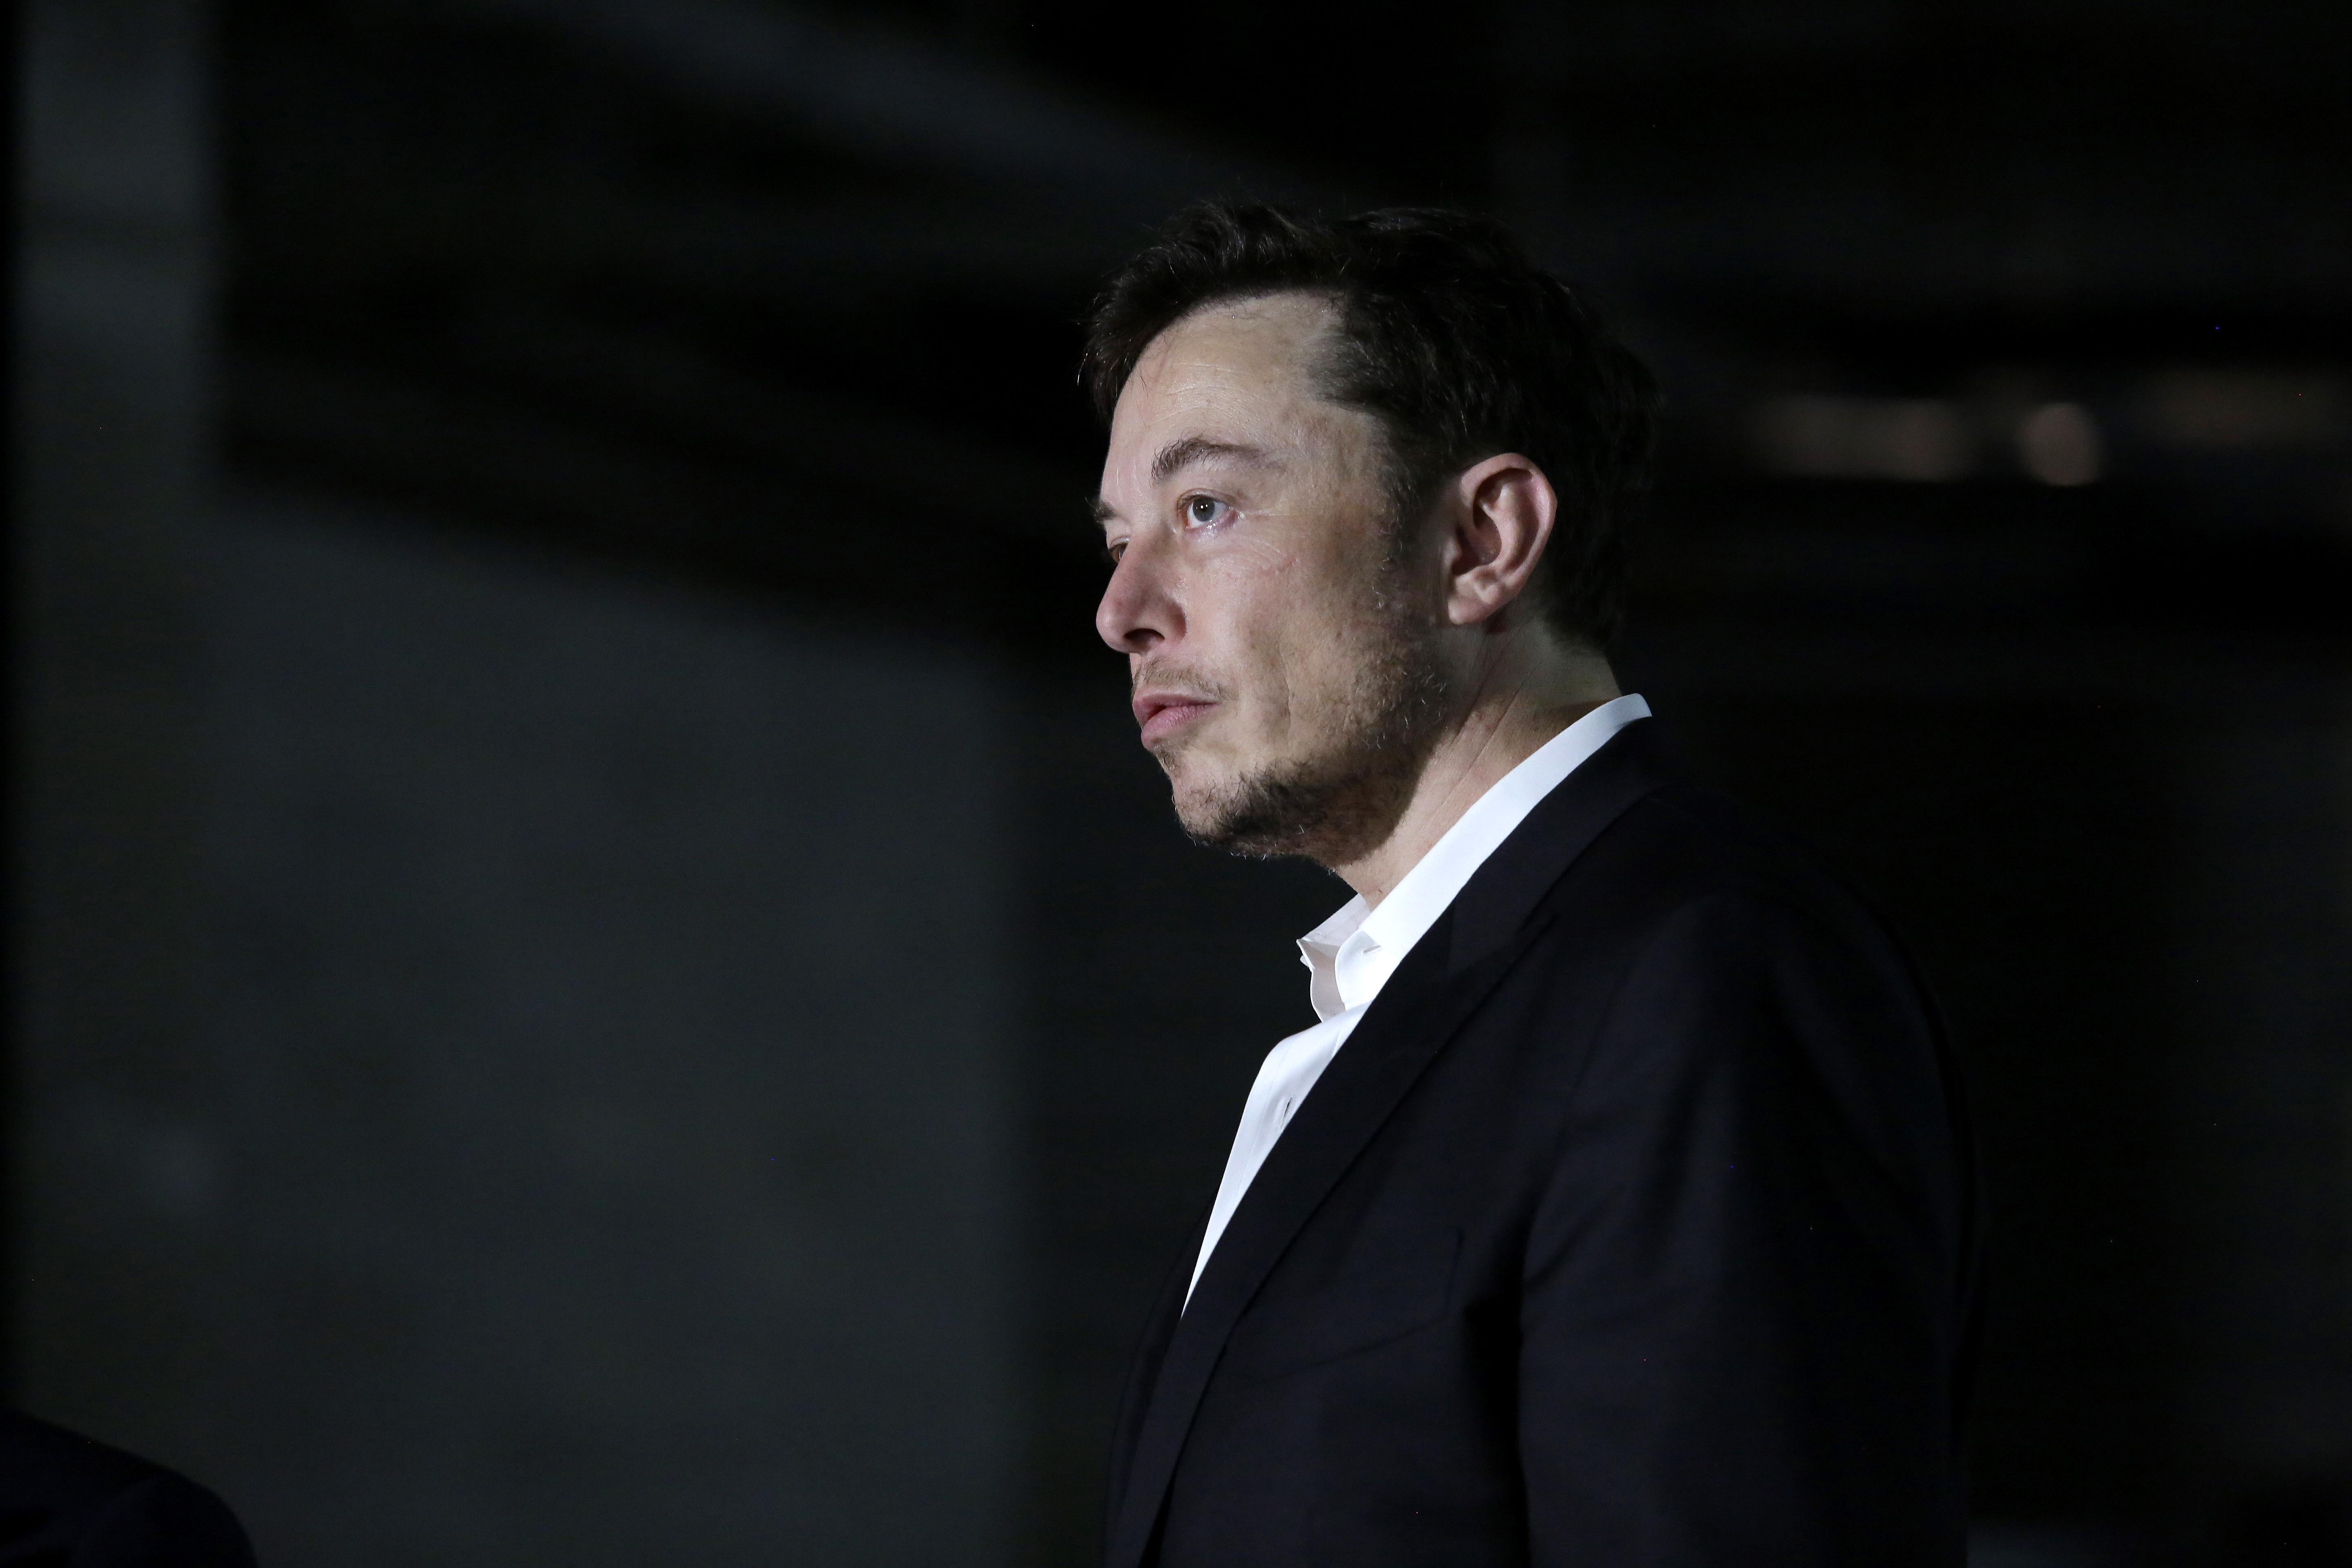 Elon Musk stands at a news conference on June 14 in Chicago. Maybe he is sleepy.